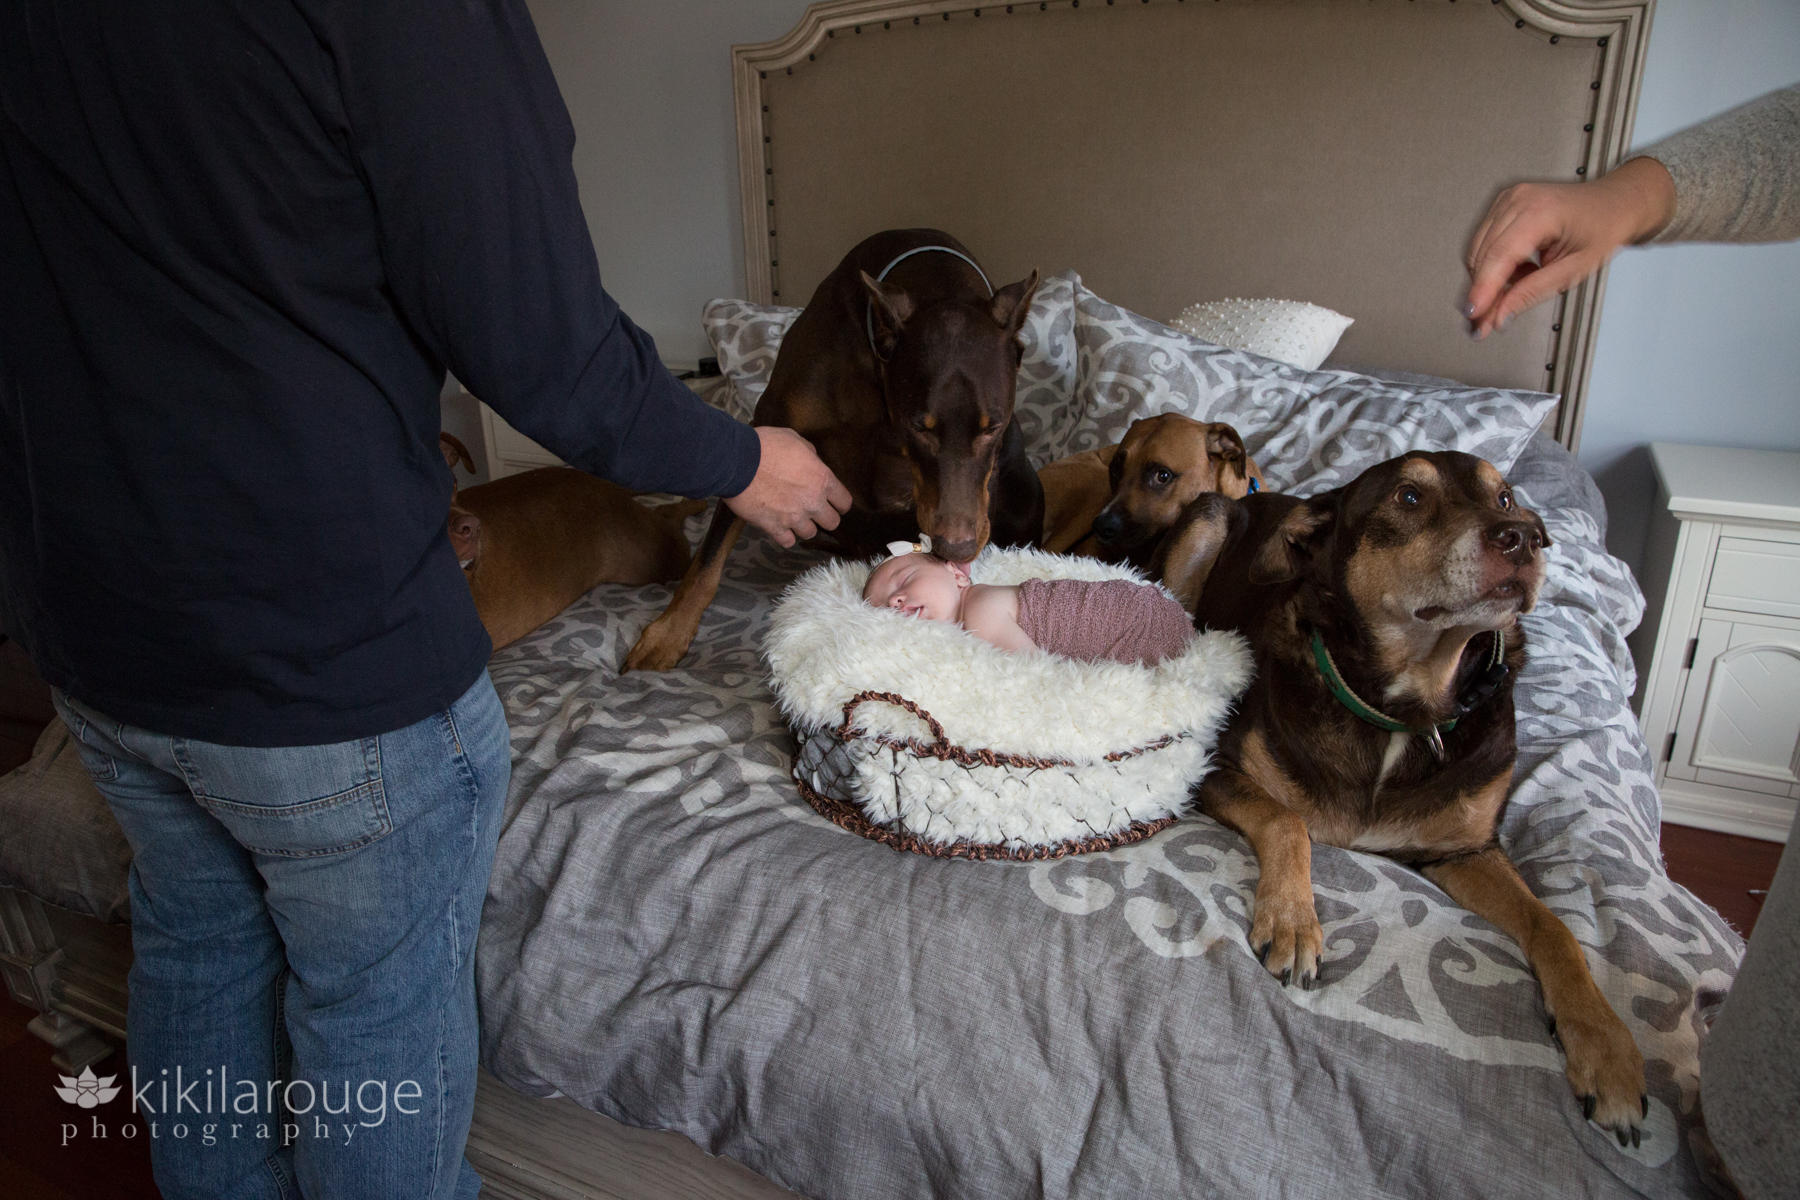 Behind the scenes with newborn baby and four dogs on bed